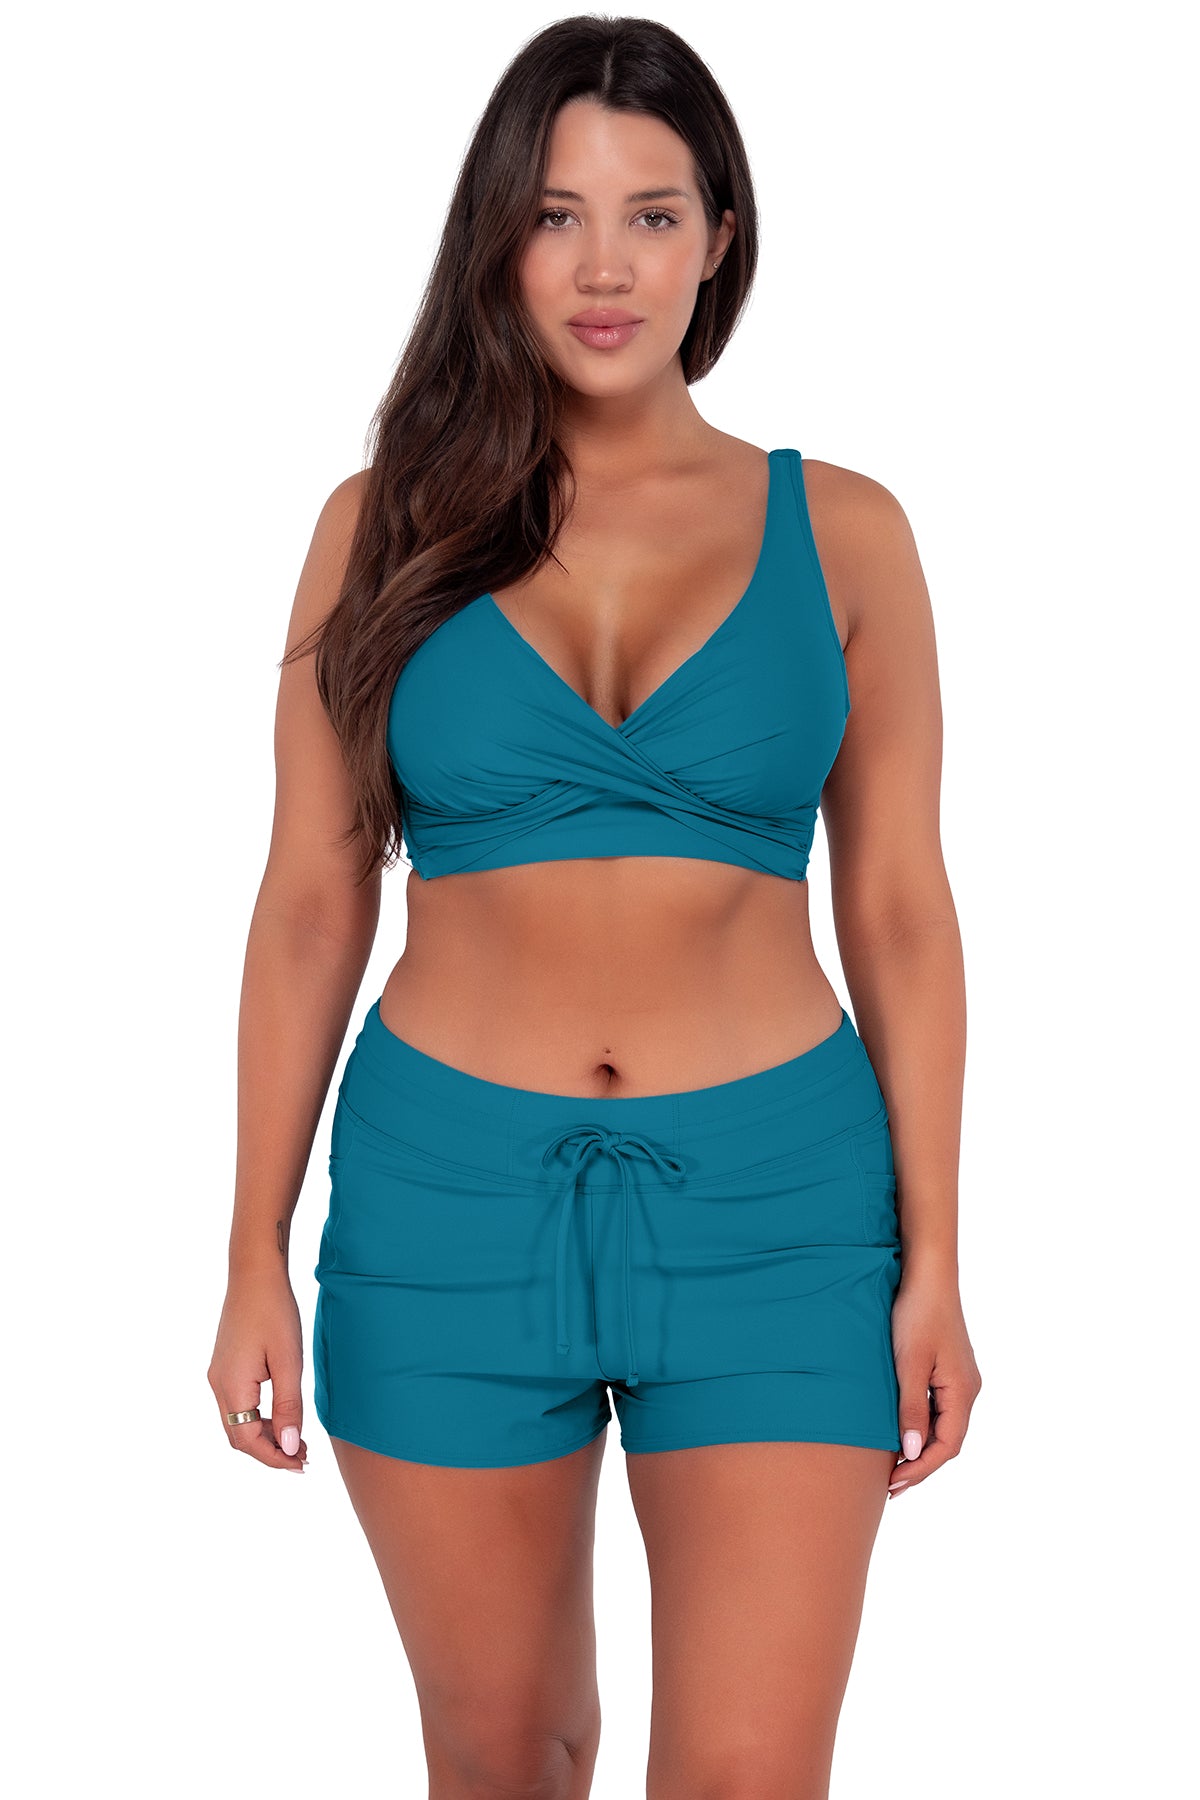 Front pose #1 of Nicki wearing Sunsets Avalon Teal Elsie Top paired with Laguna Swim Short women's casual wear